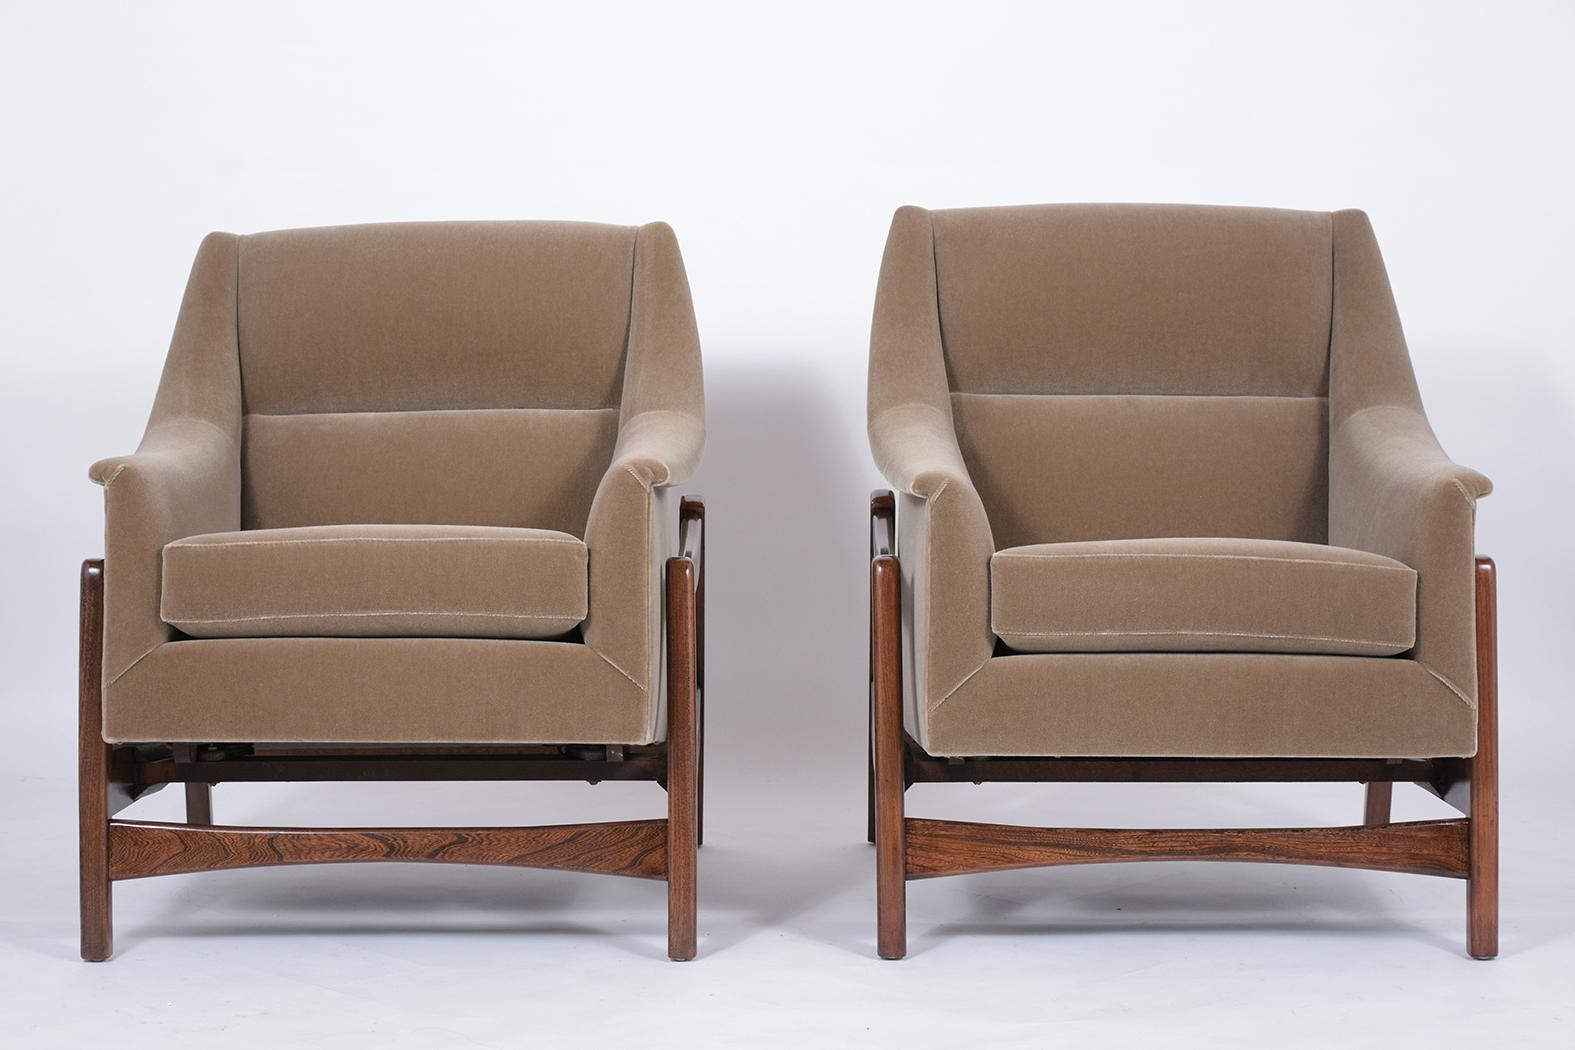 American Pair of Mid-Century Modern Rocking Chairs